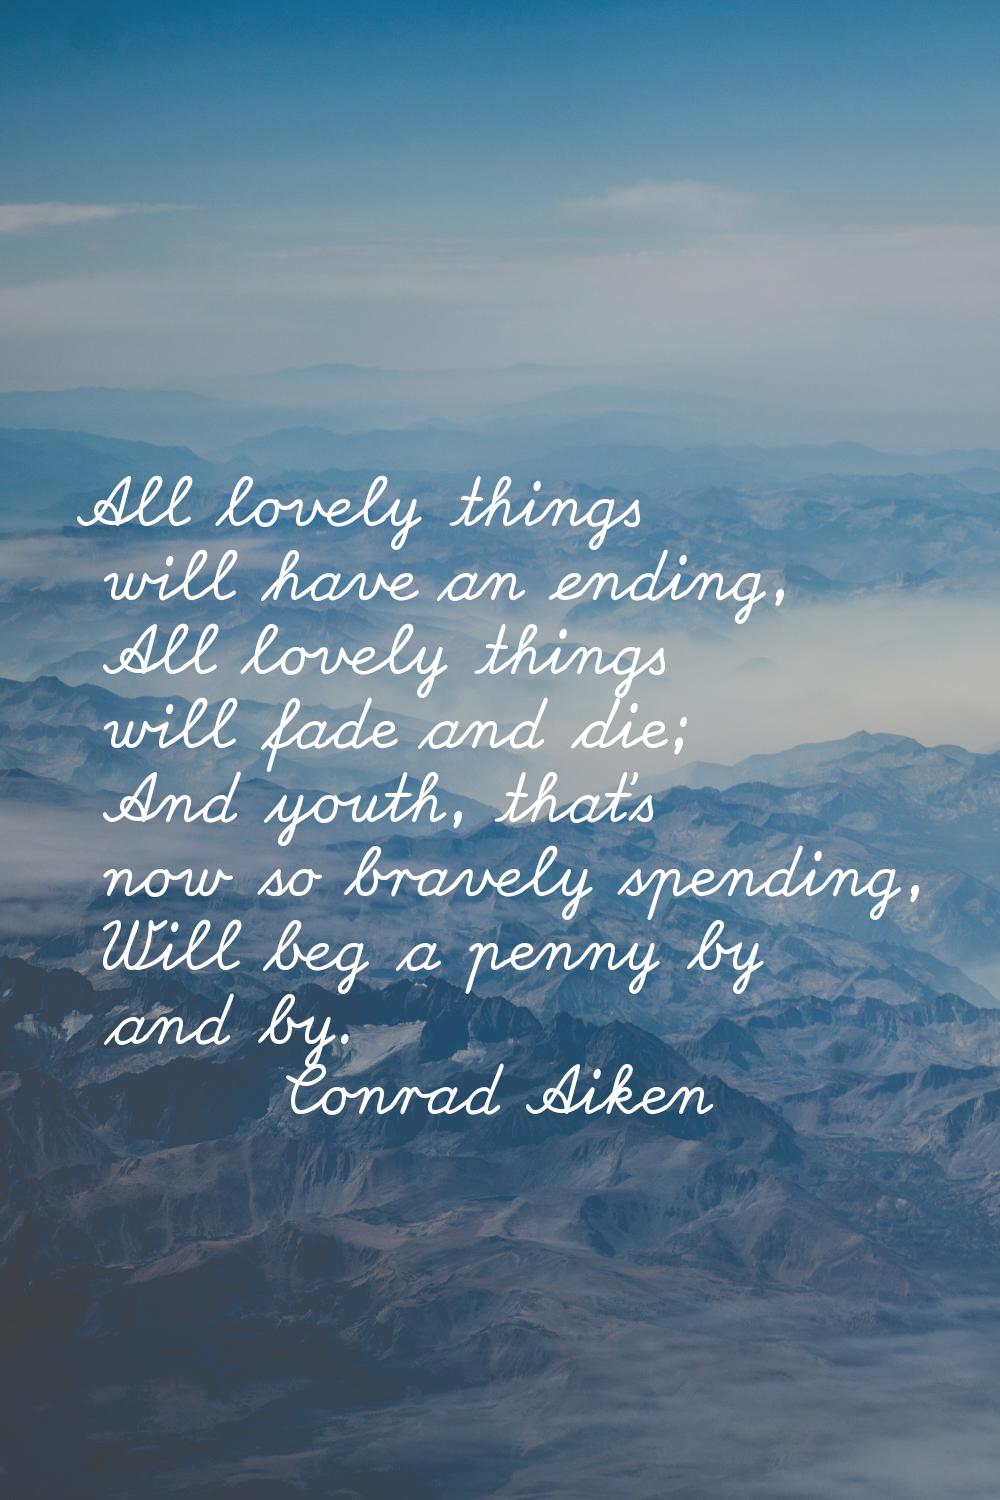 All lovely things will have an ending, All lovely things will fade and die; And youth, that's now s